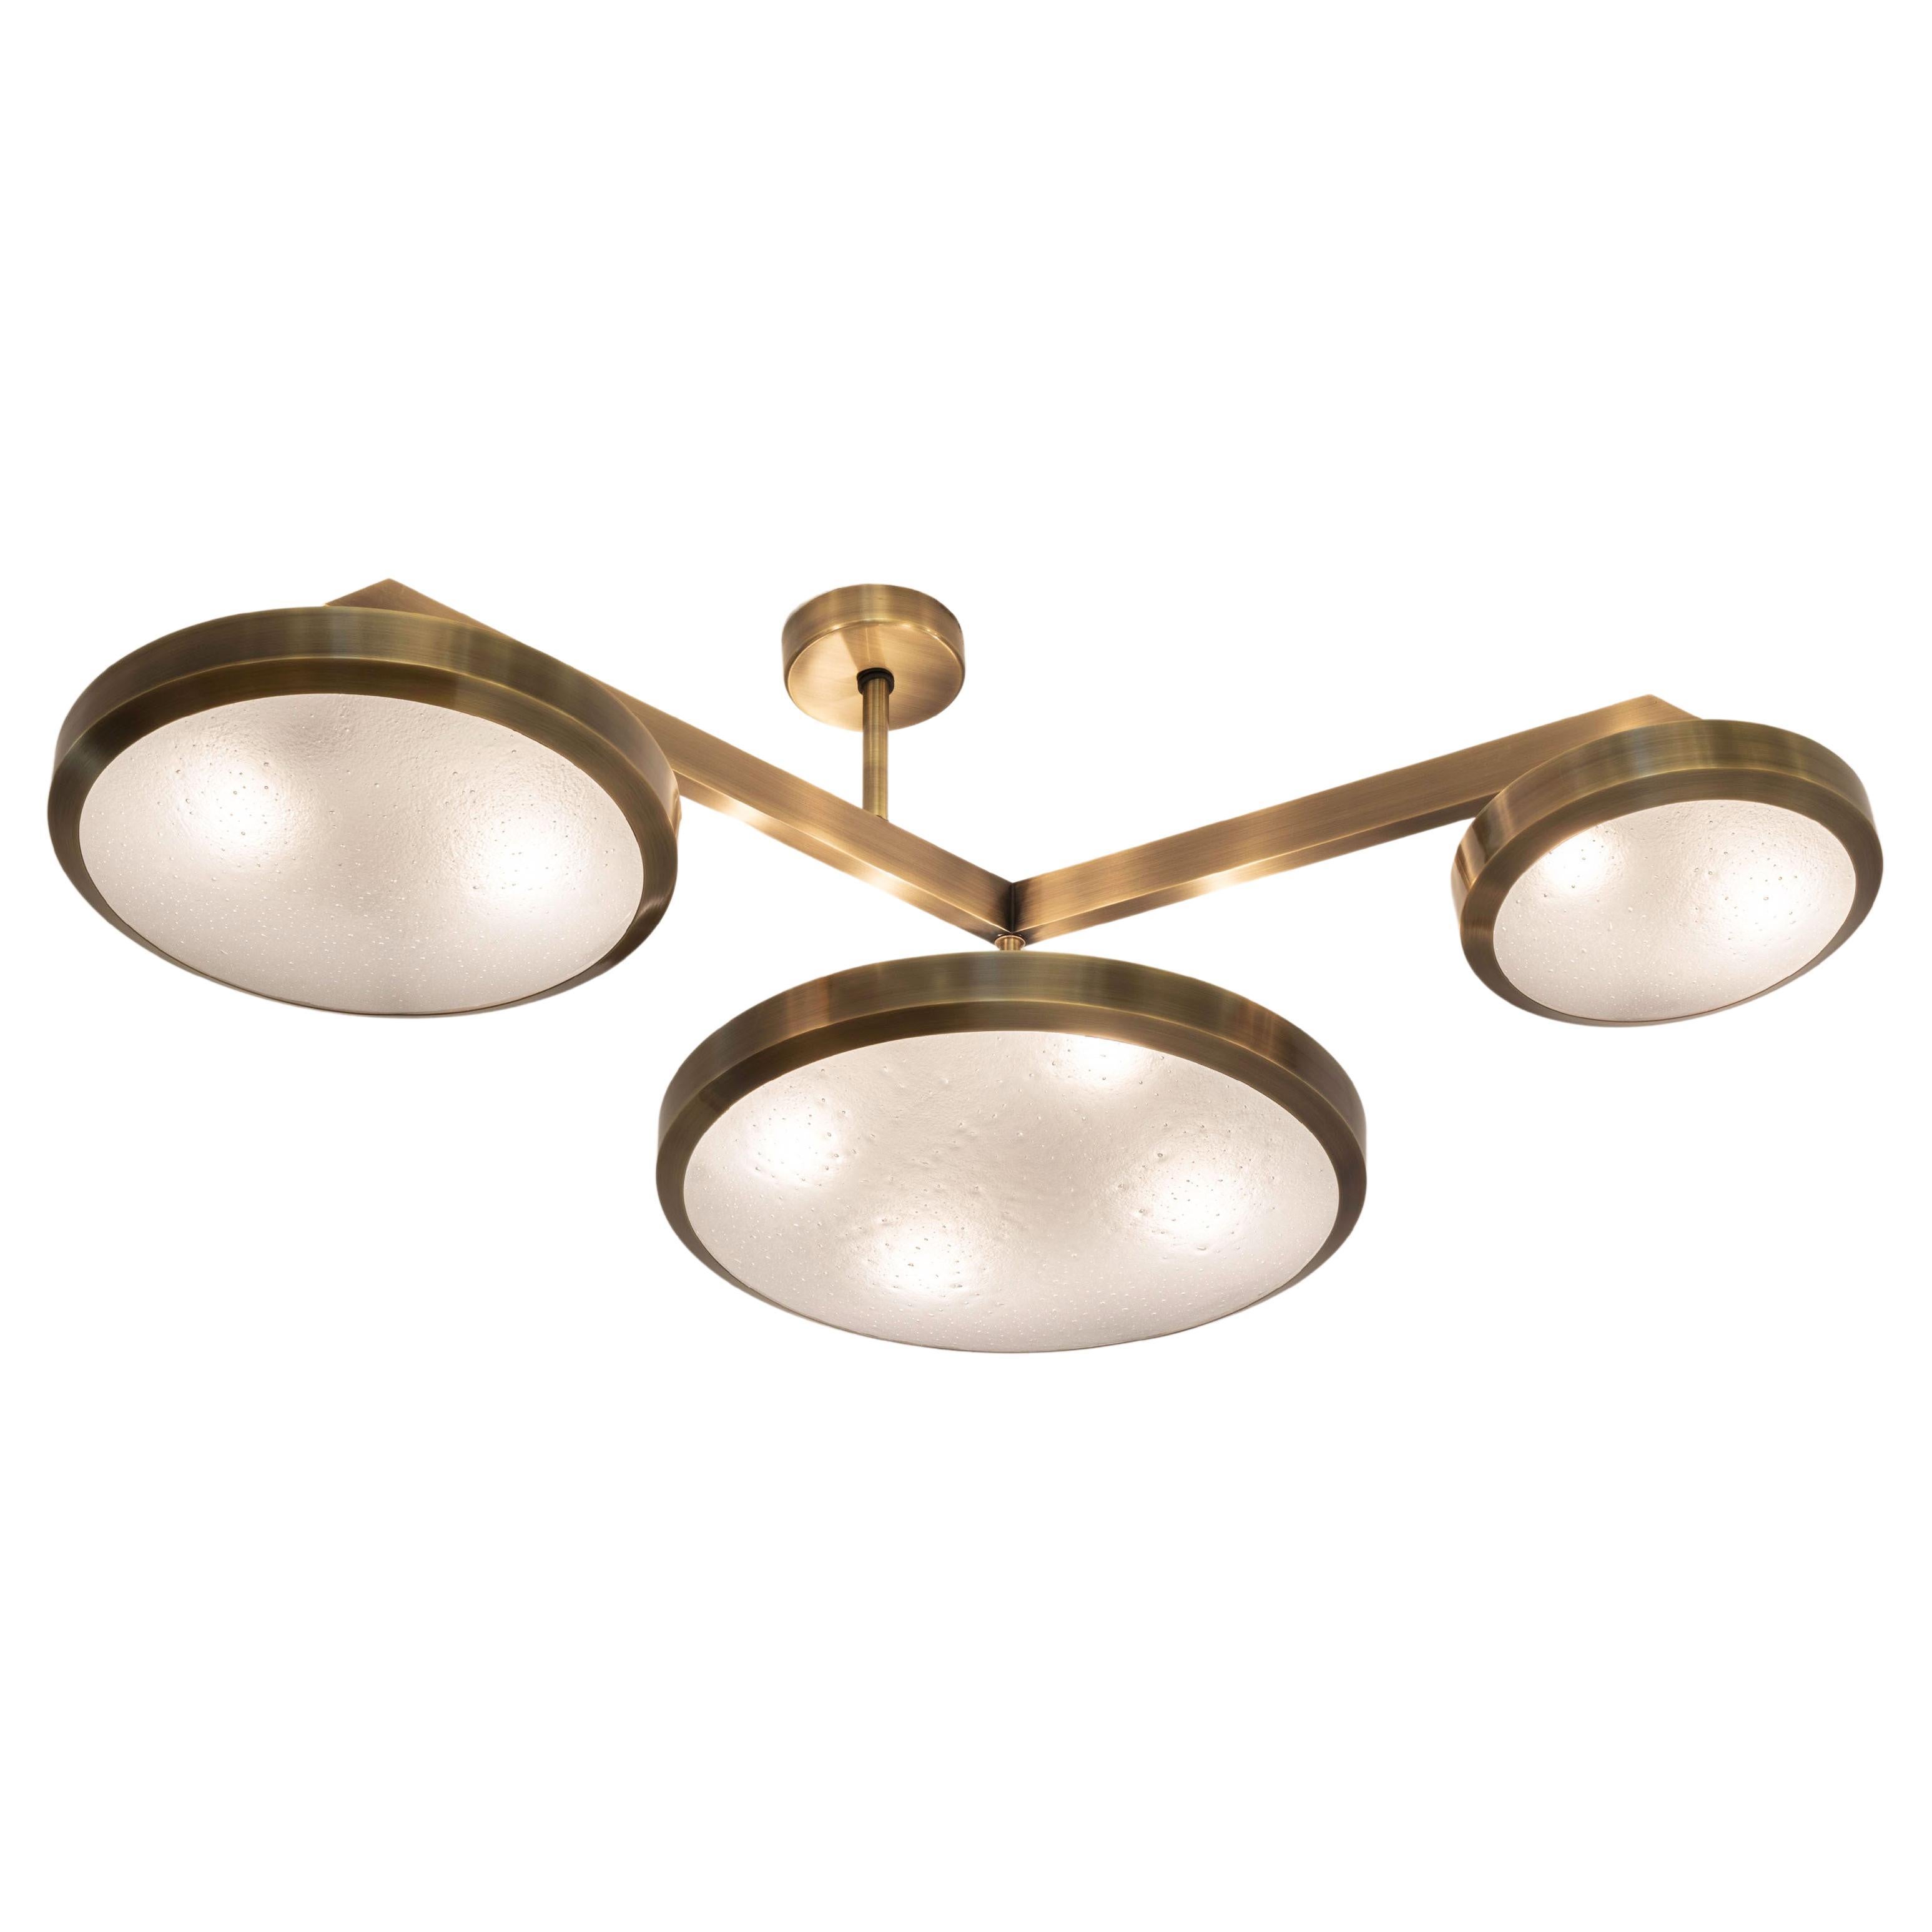 Zeta Ceiling Light by Gaspare Asaro - Bronze Finish For Sale